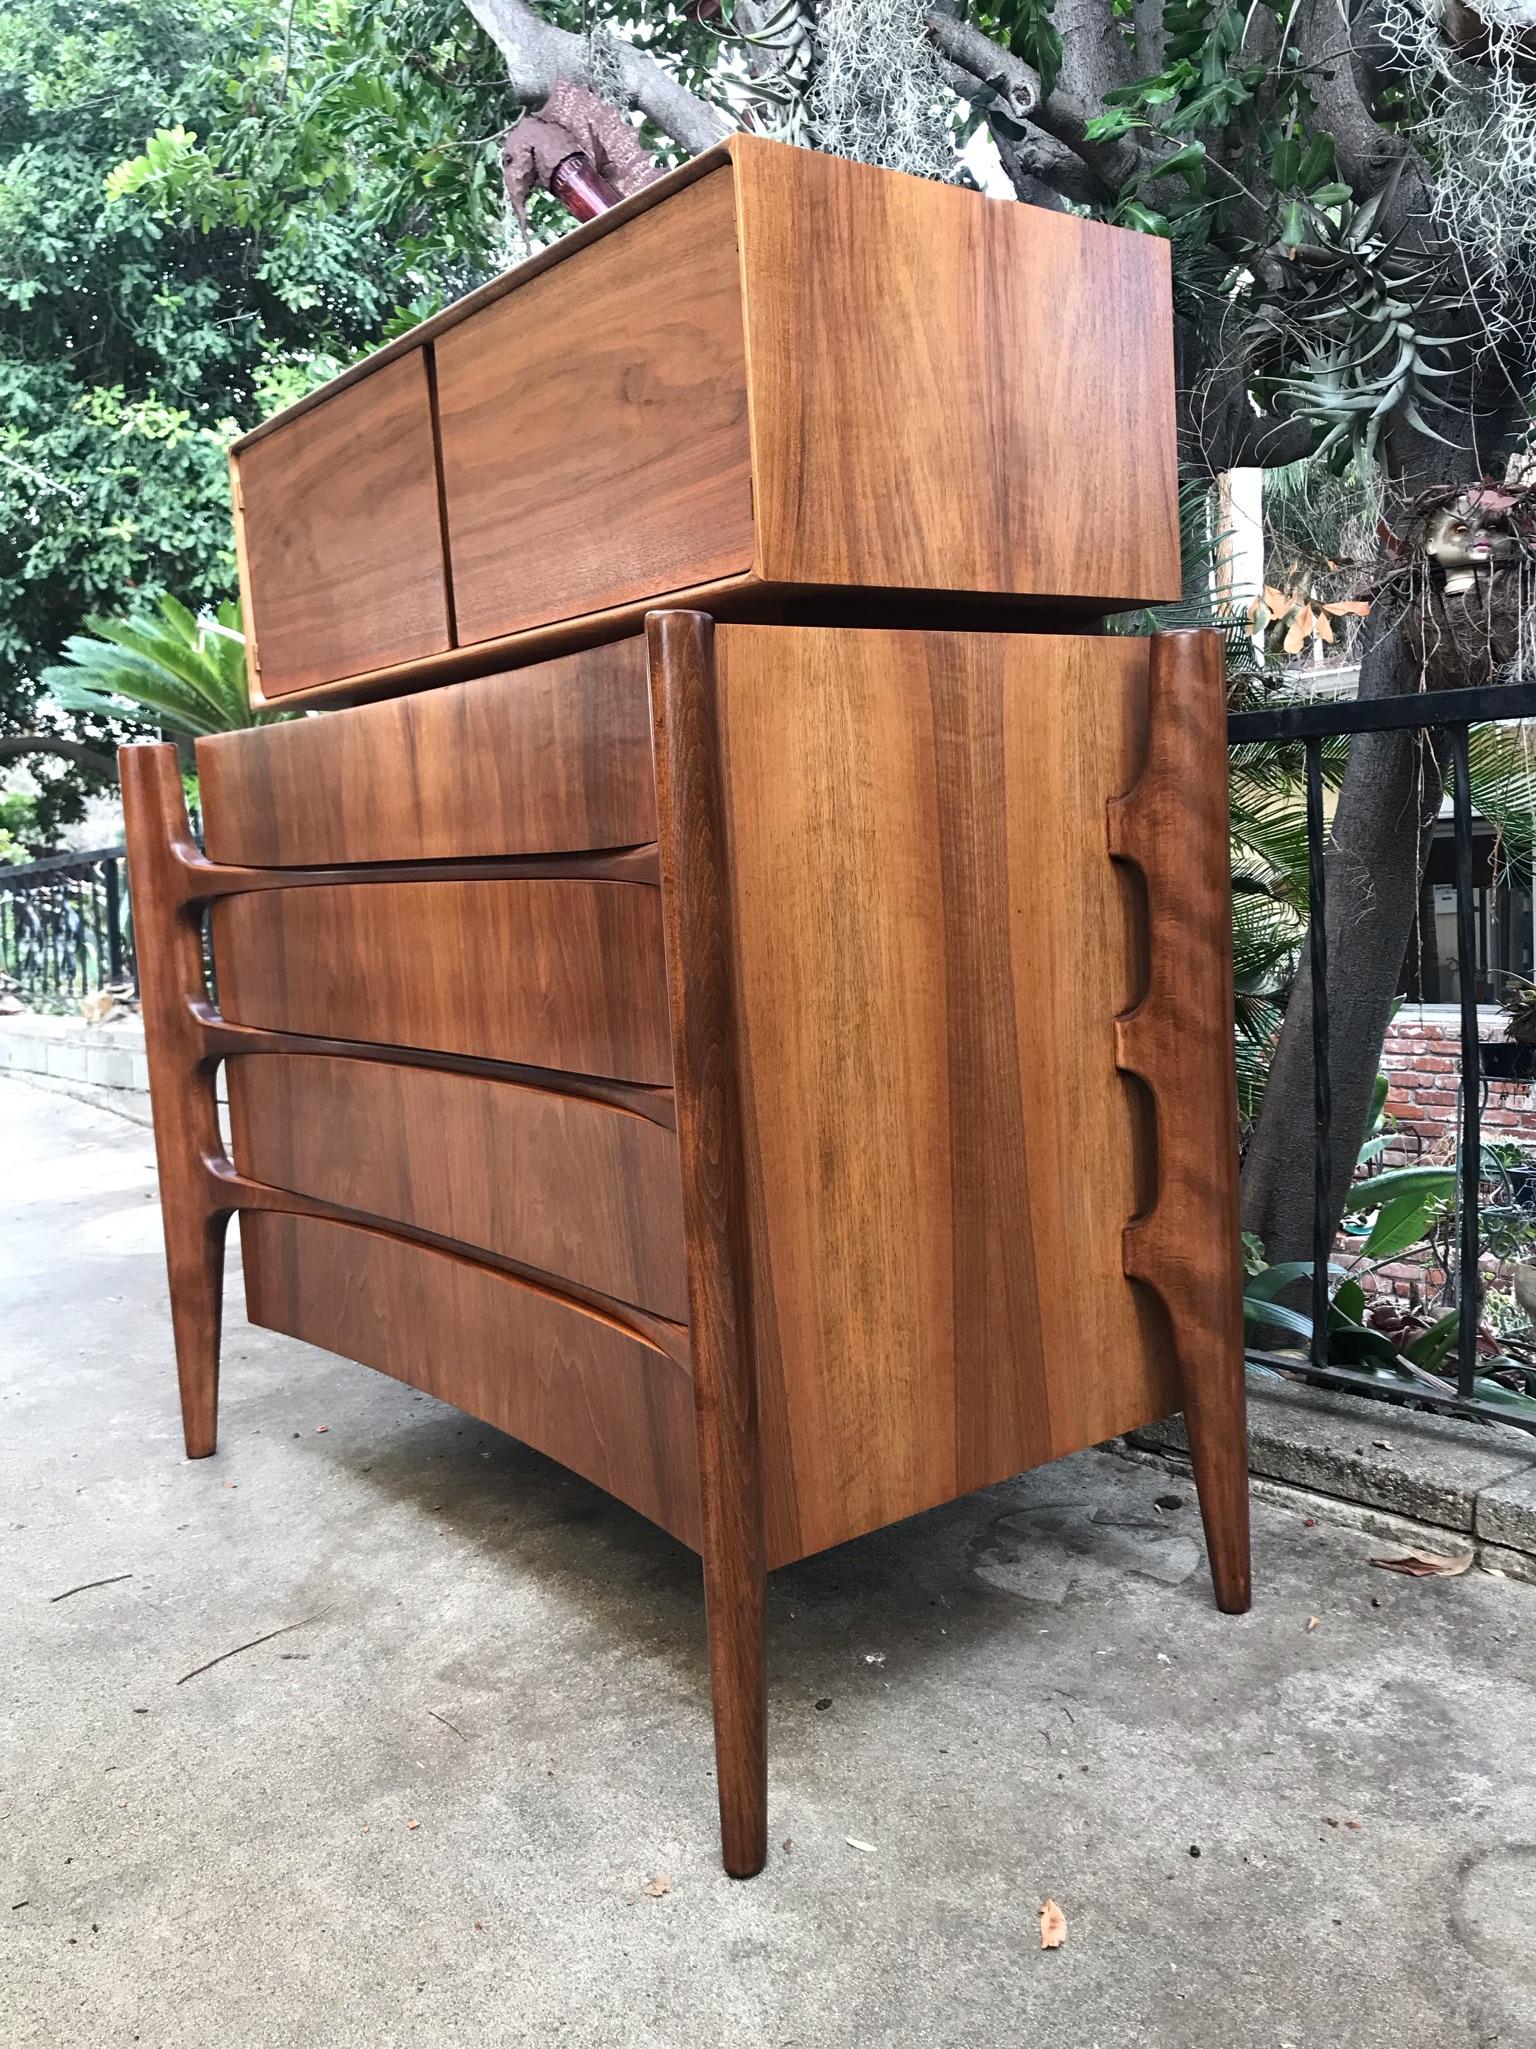 This is a stunning 2 piece Highboy chest of drawers with matching cabinet designed by William Hinn of Sweden circa 1960’s. The dresser consists of a bottom chest of four drawers and a separate smaller cabinet that sits on top. They can be used